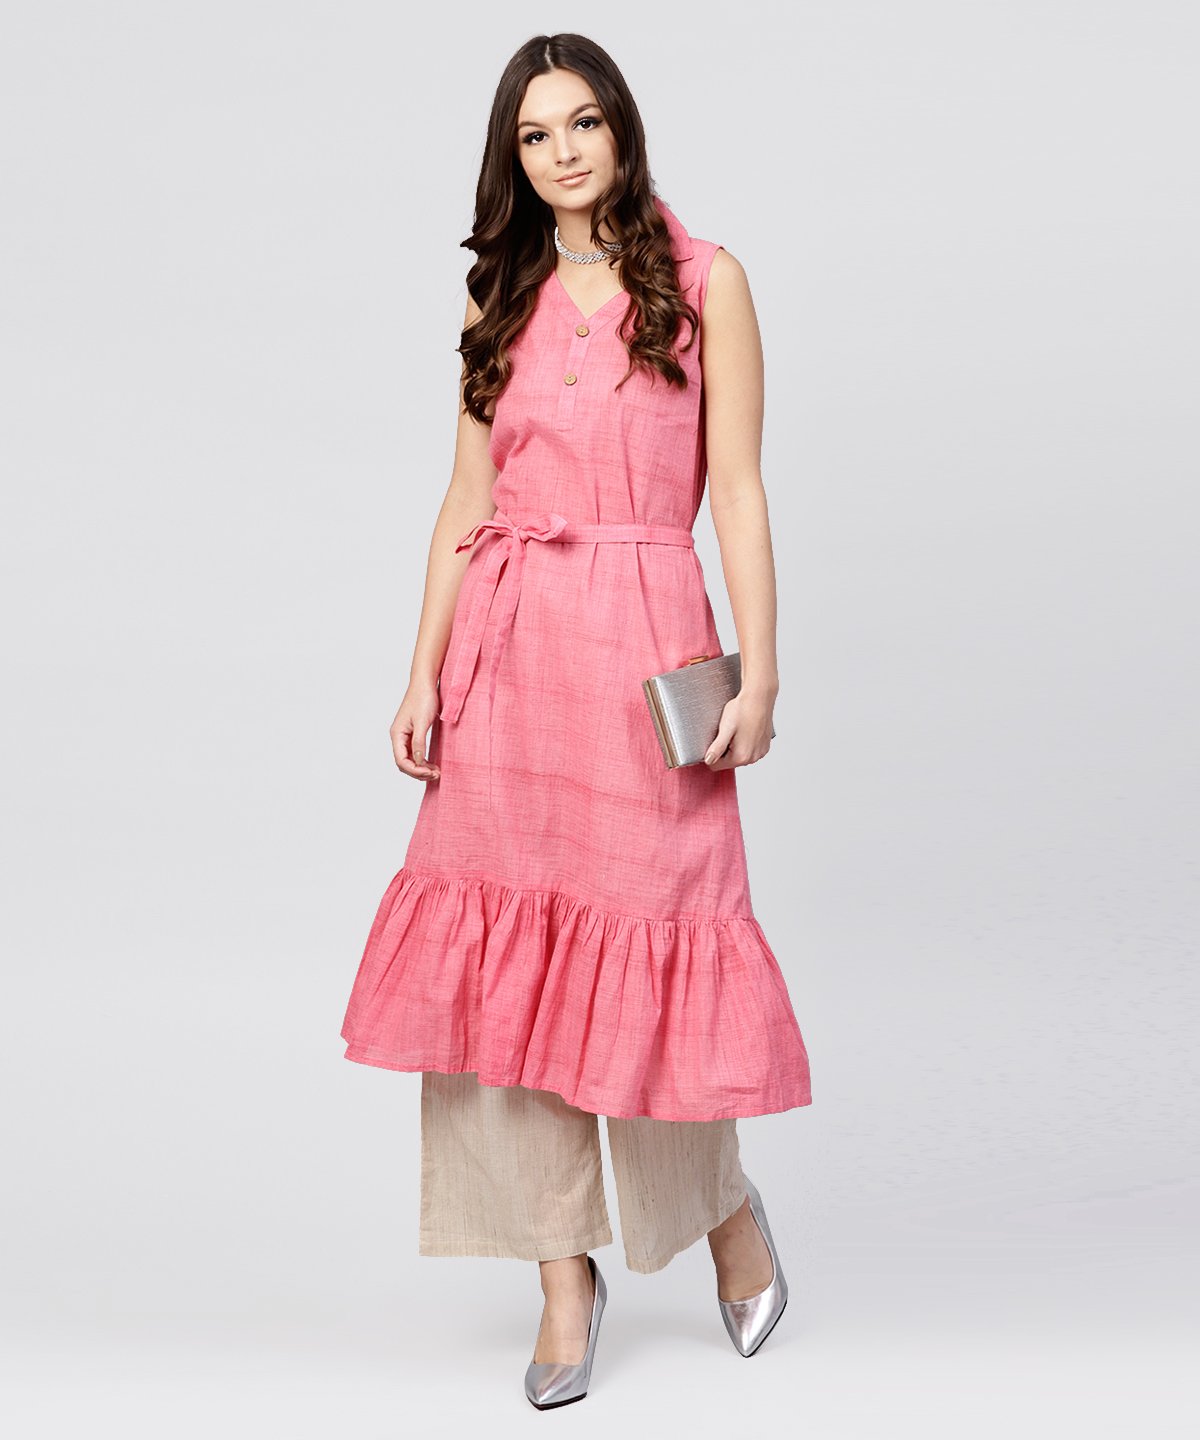 Women's Pink Cotton Tiered Dress With Shirt Collar And Front Packet - Nayo Clothing